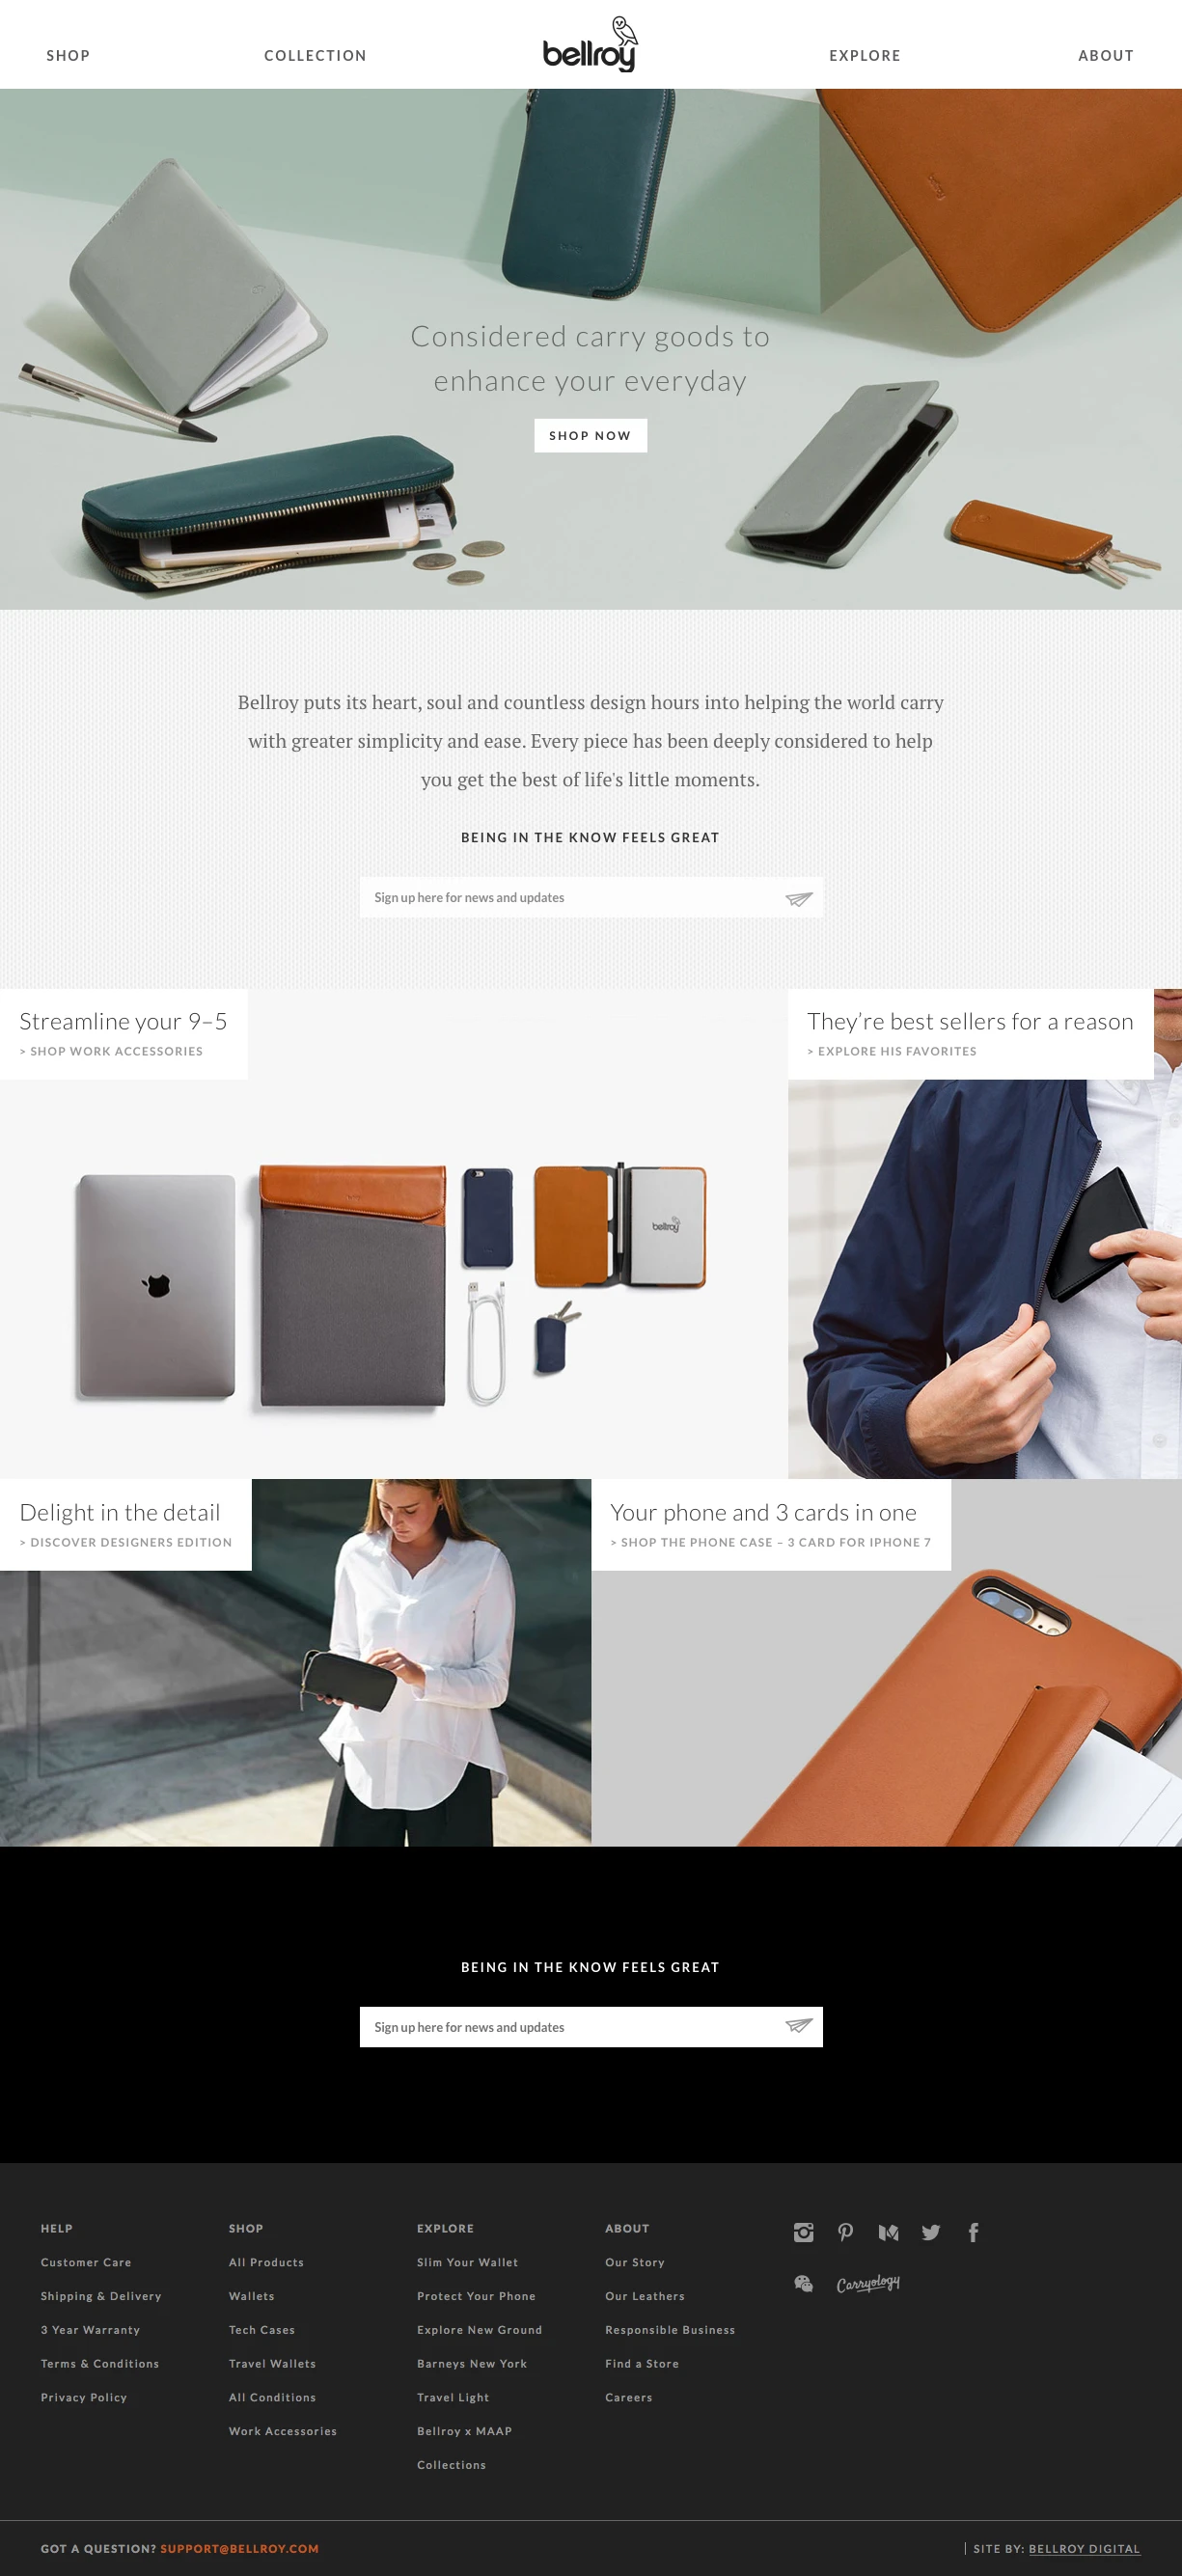 Bellroy Landing Page Example: Bellroy puts its heart, soul and countless design hours into helping the world carry with simplicity and ease. Every piece has been deeply considered, for the best of life's little moments.